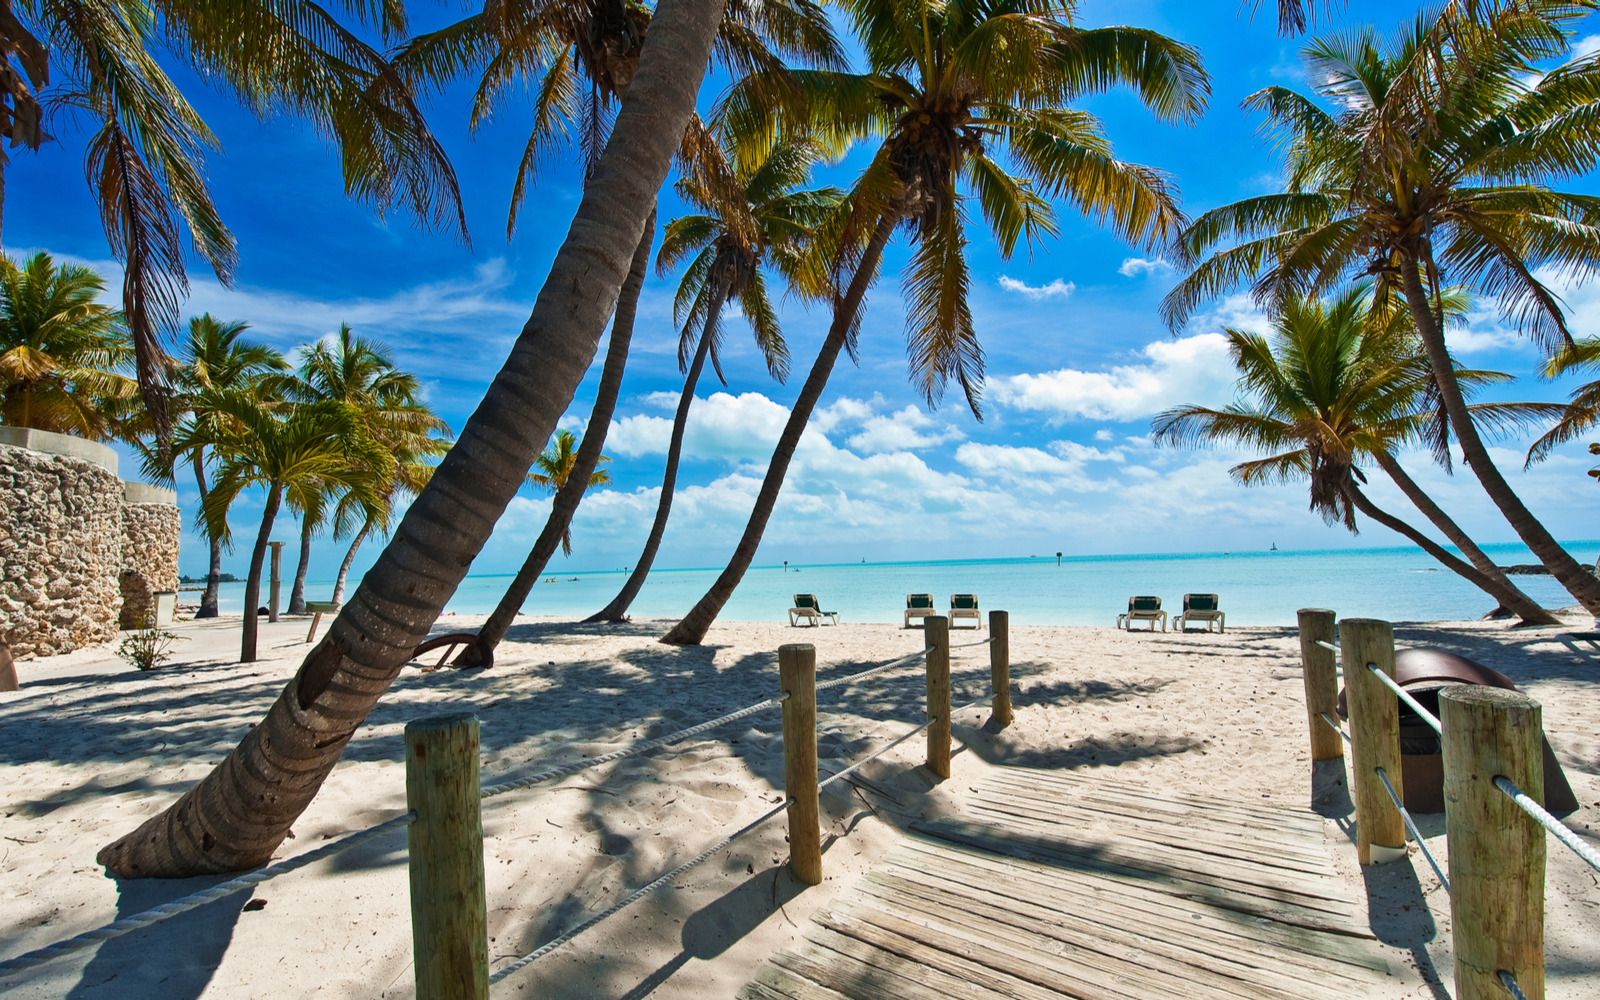 16 Best Things to Do in Key West in 2022